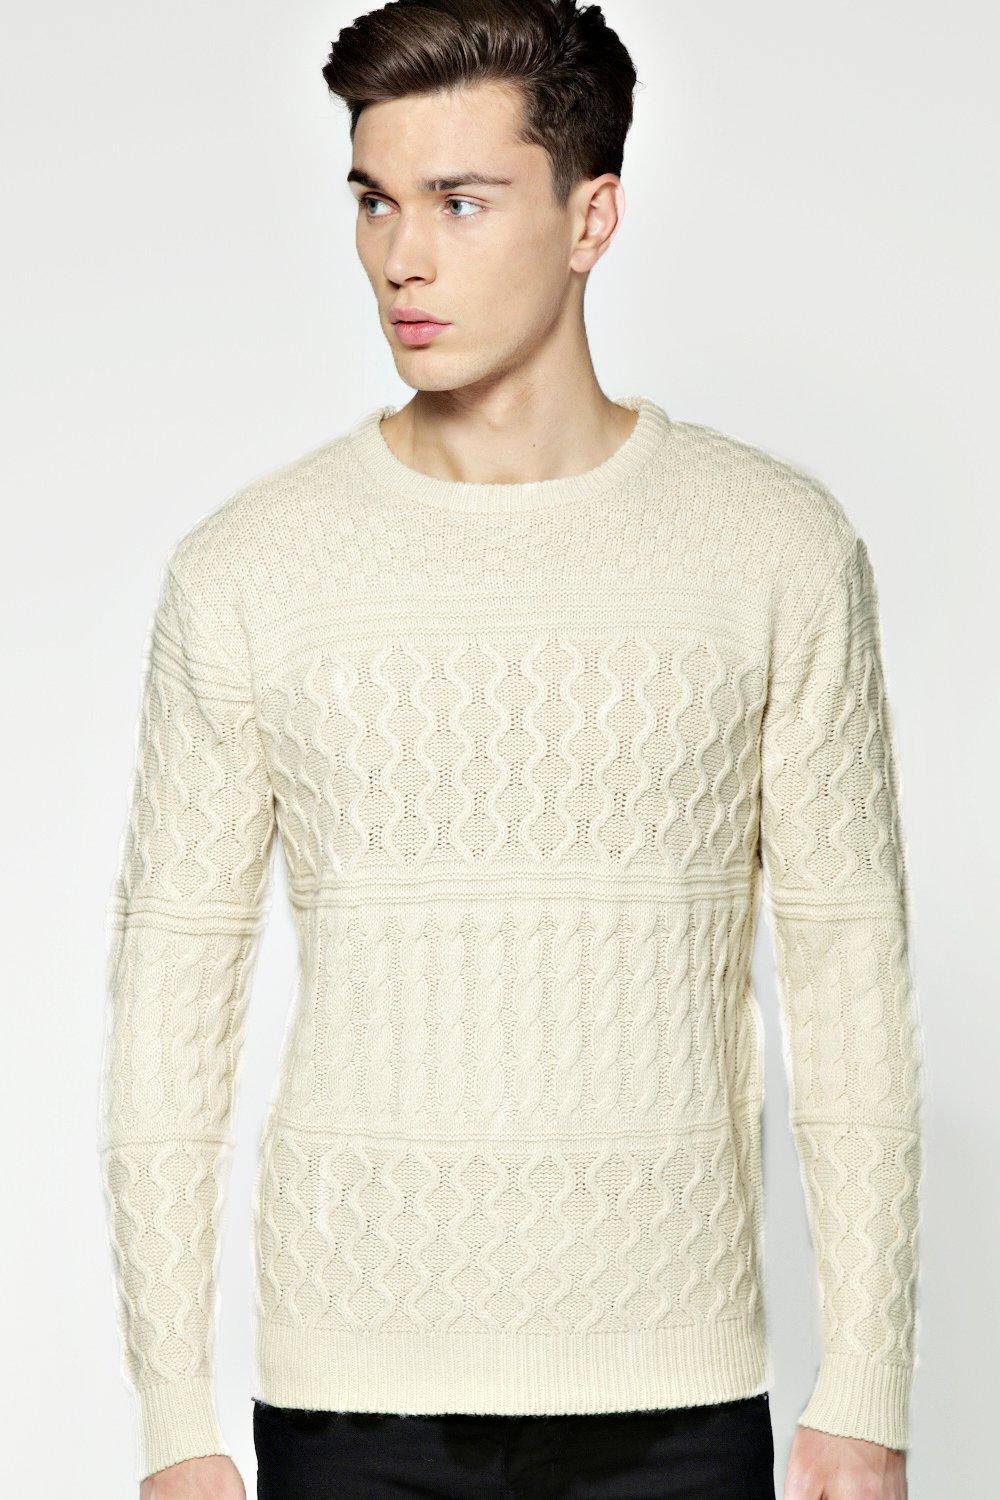 Boohoo Mens All Over Cable Jumper | eBay